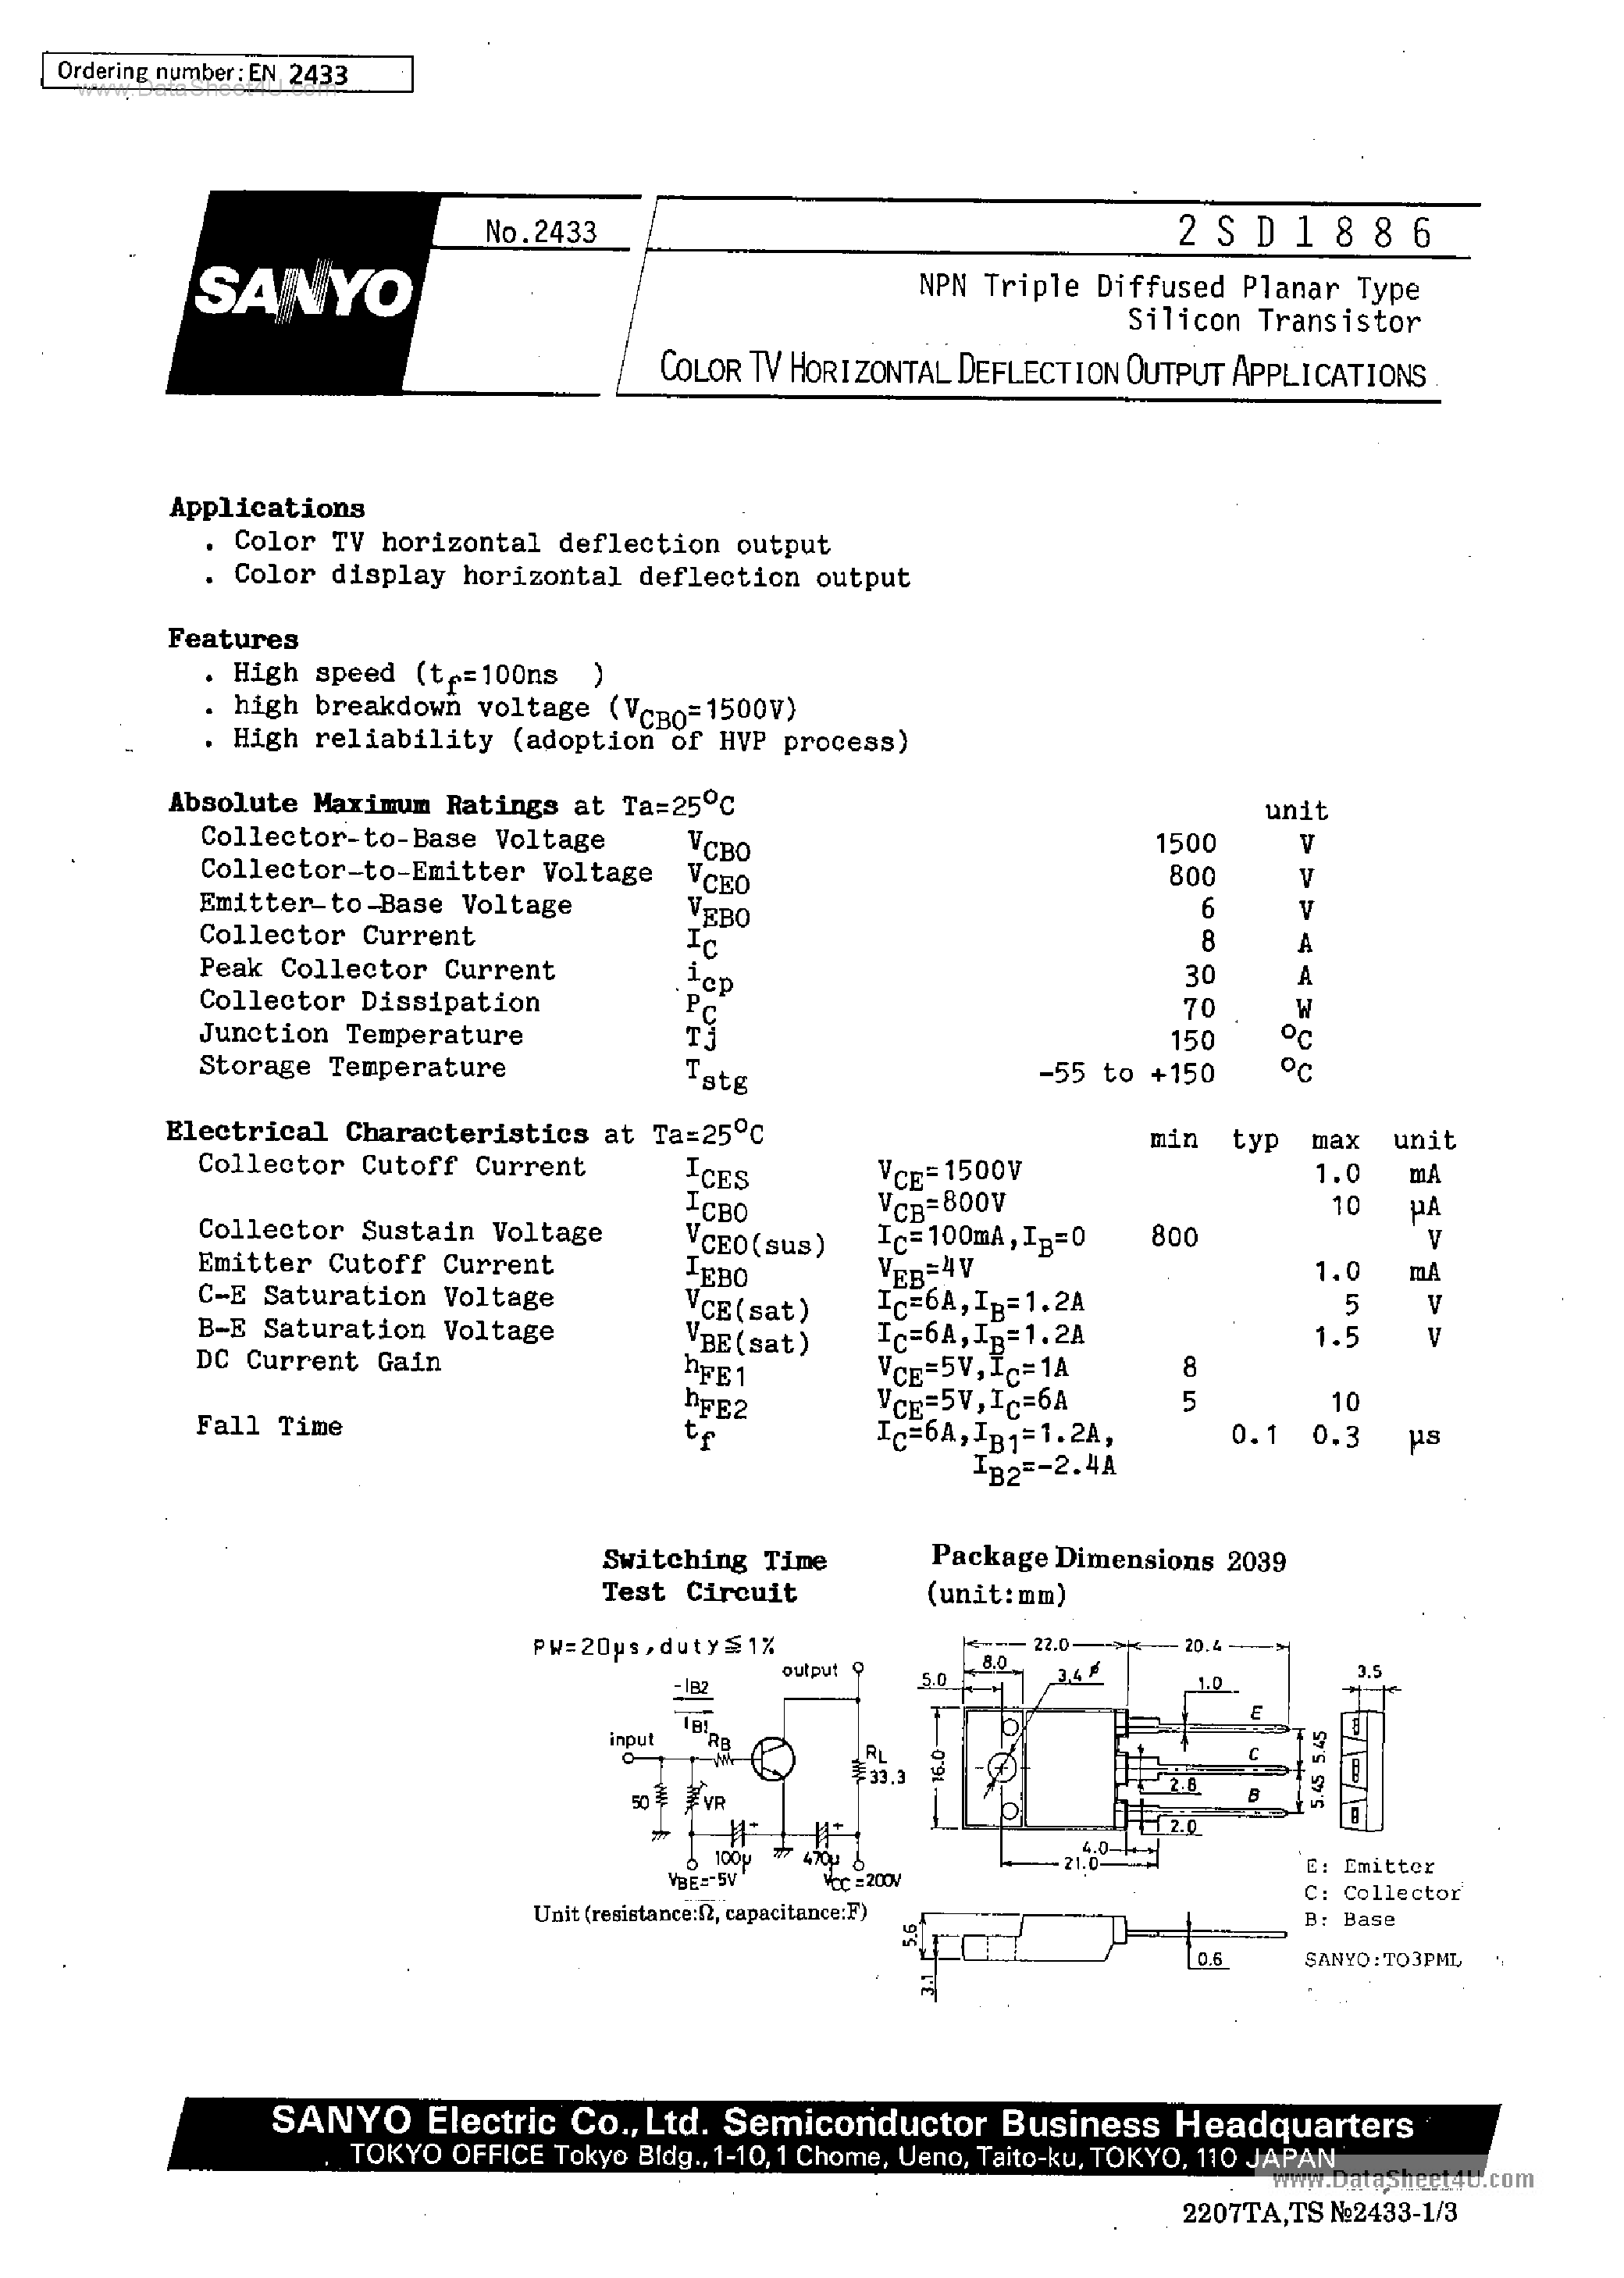 Datasheet D1886 - Search -----> 2SD1886 page 1